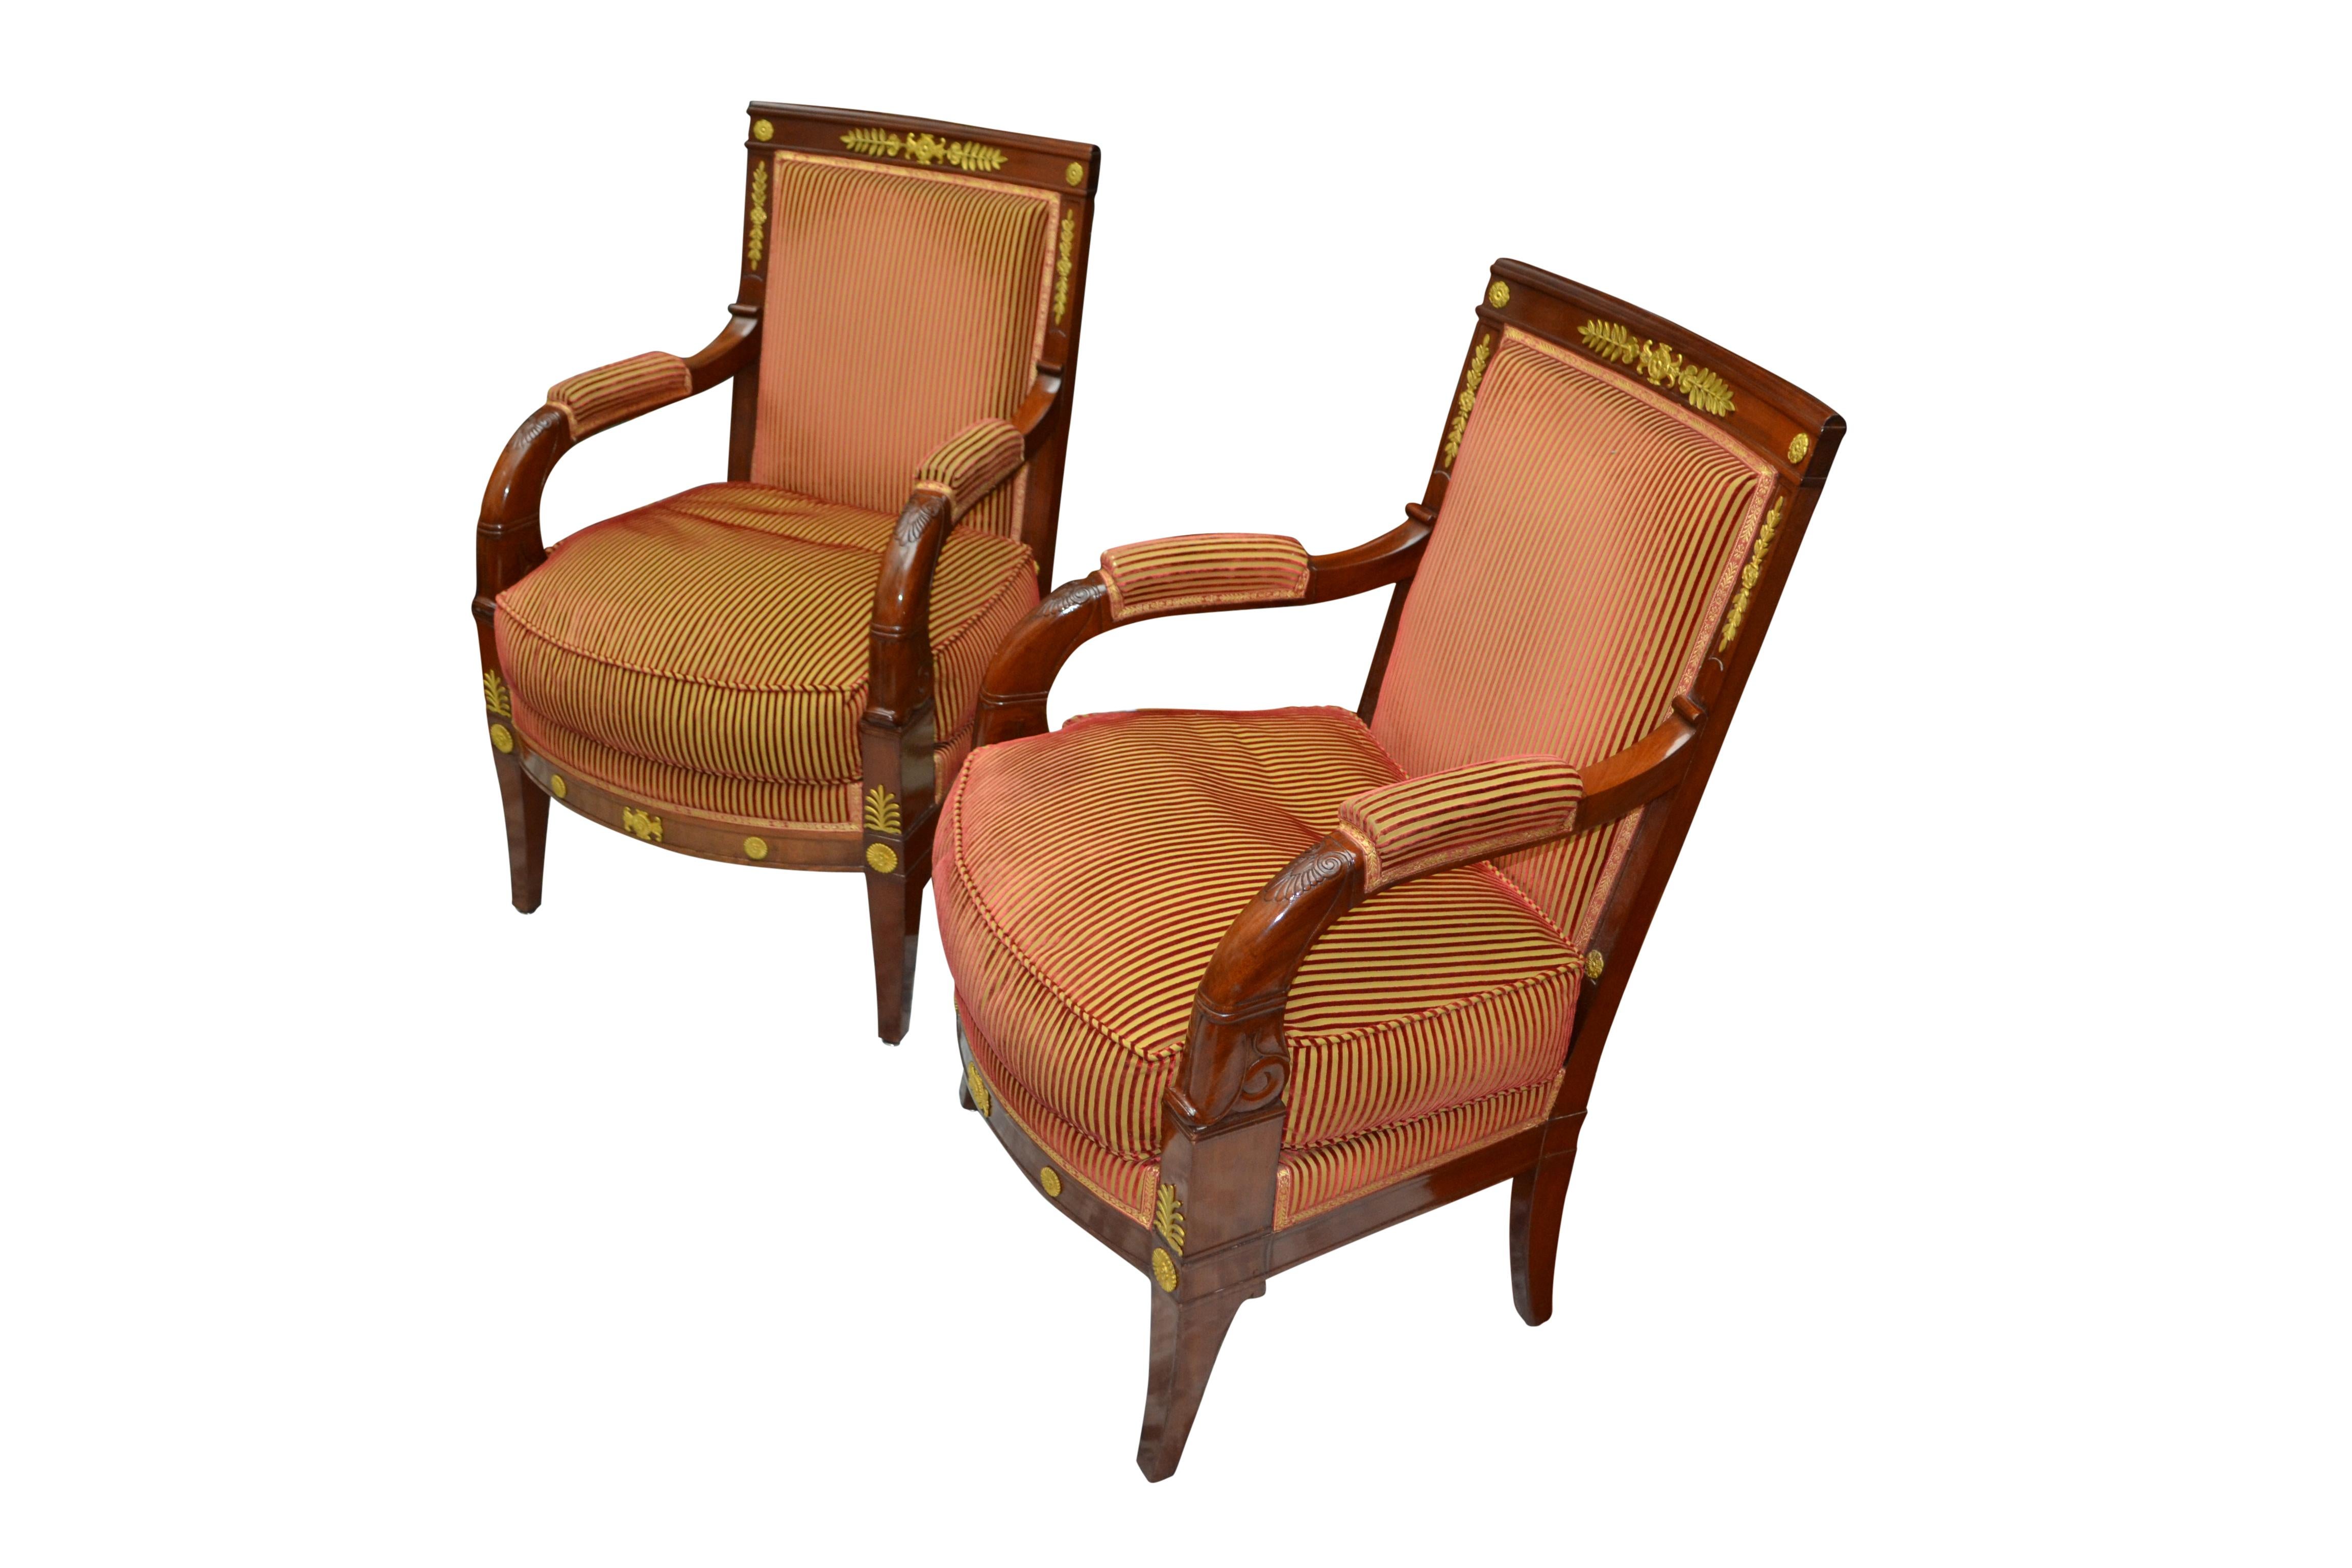 Pair of Early 19th Century French Empire Mahogany Armchairs called 